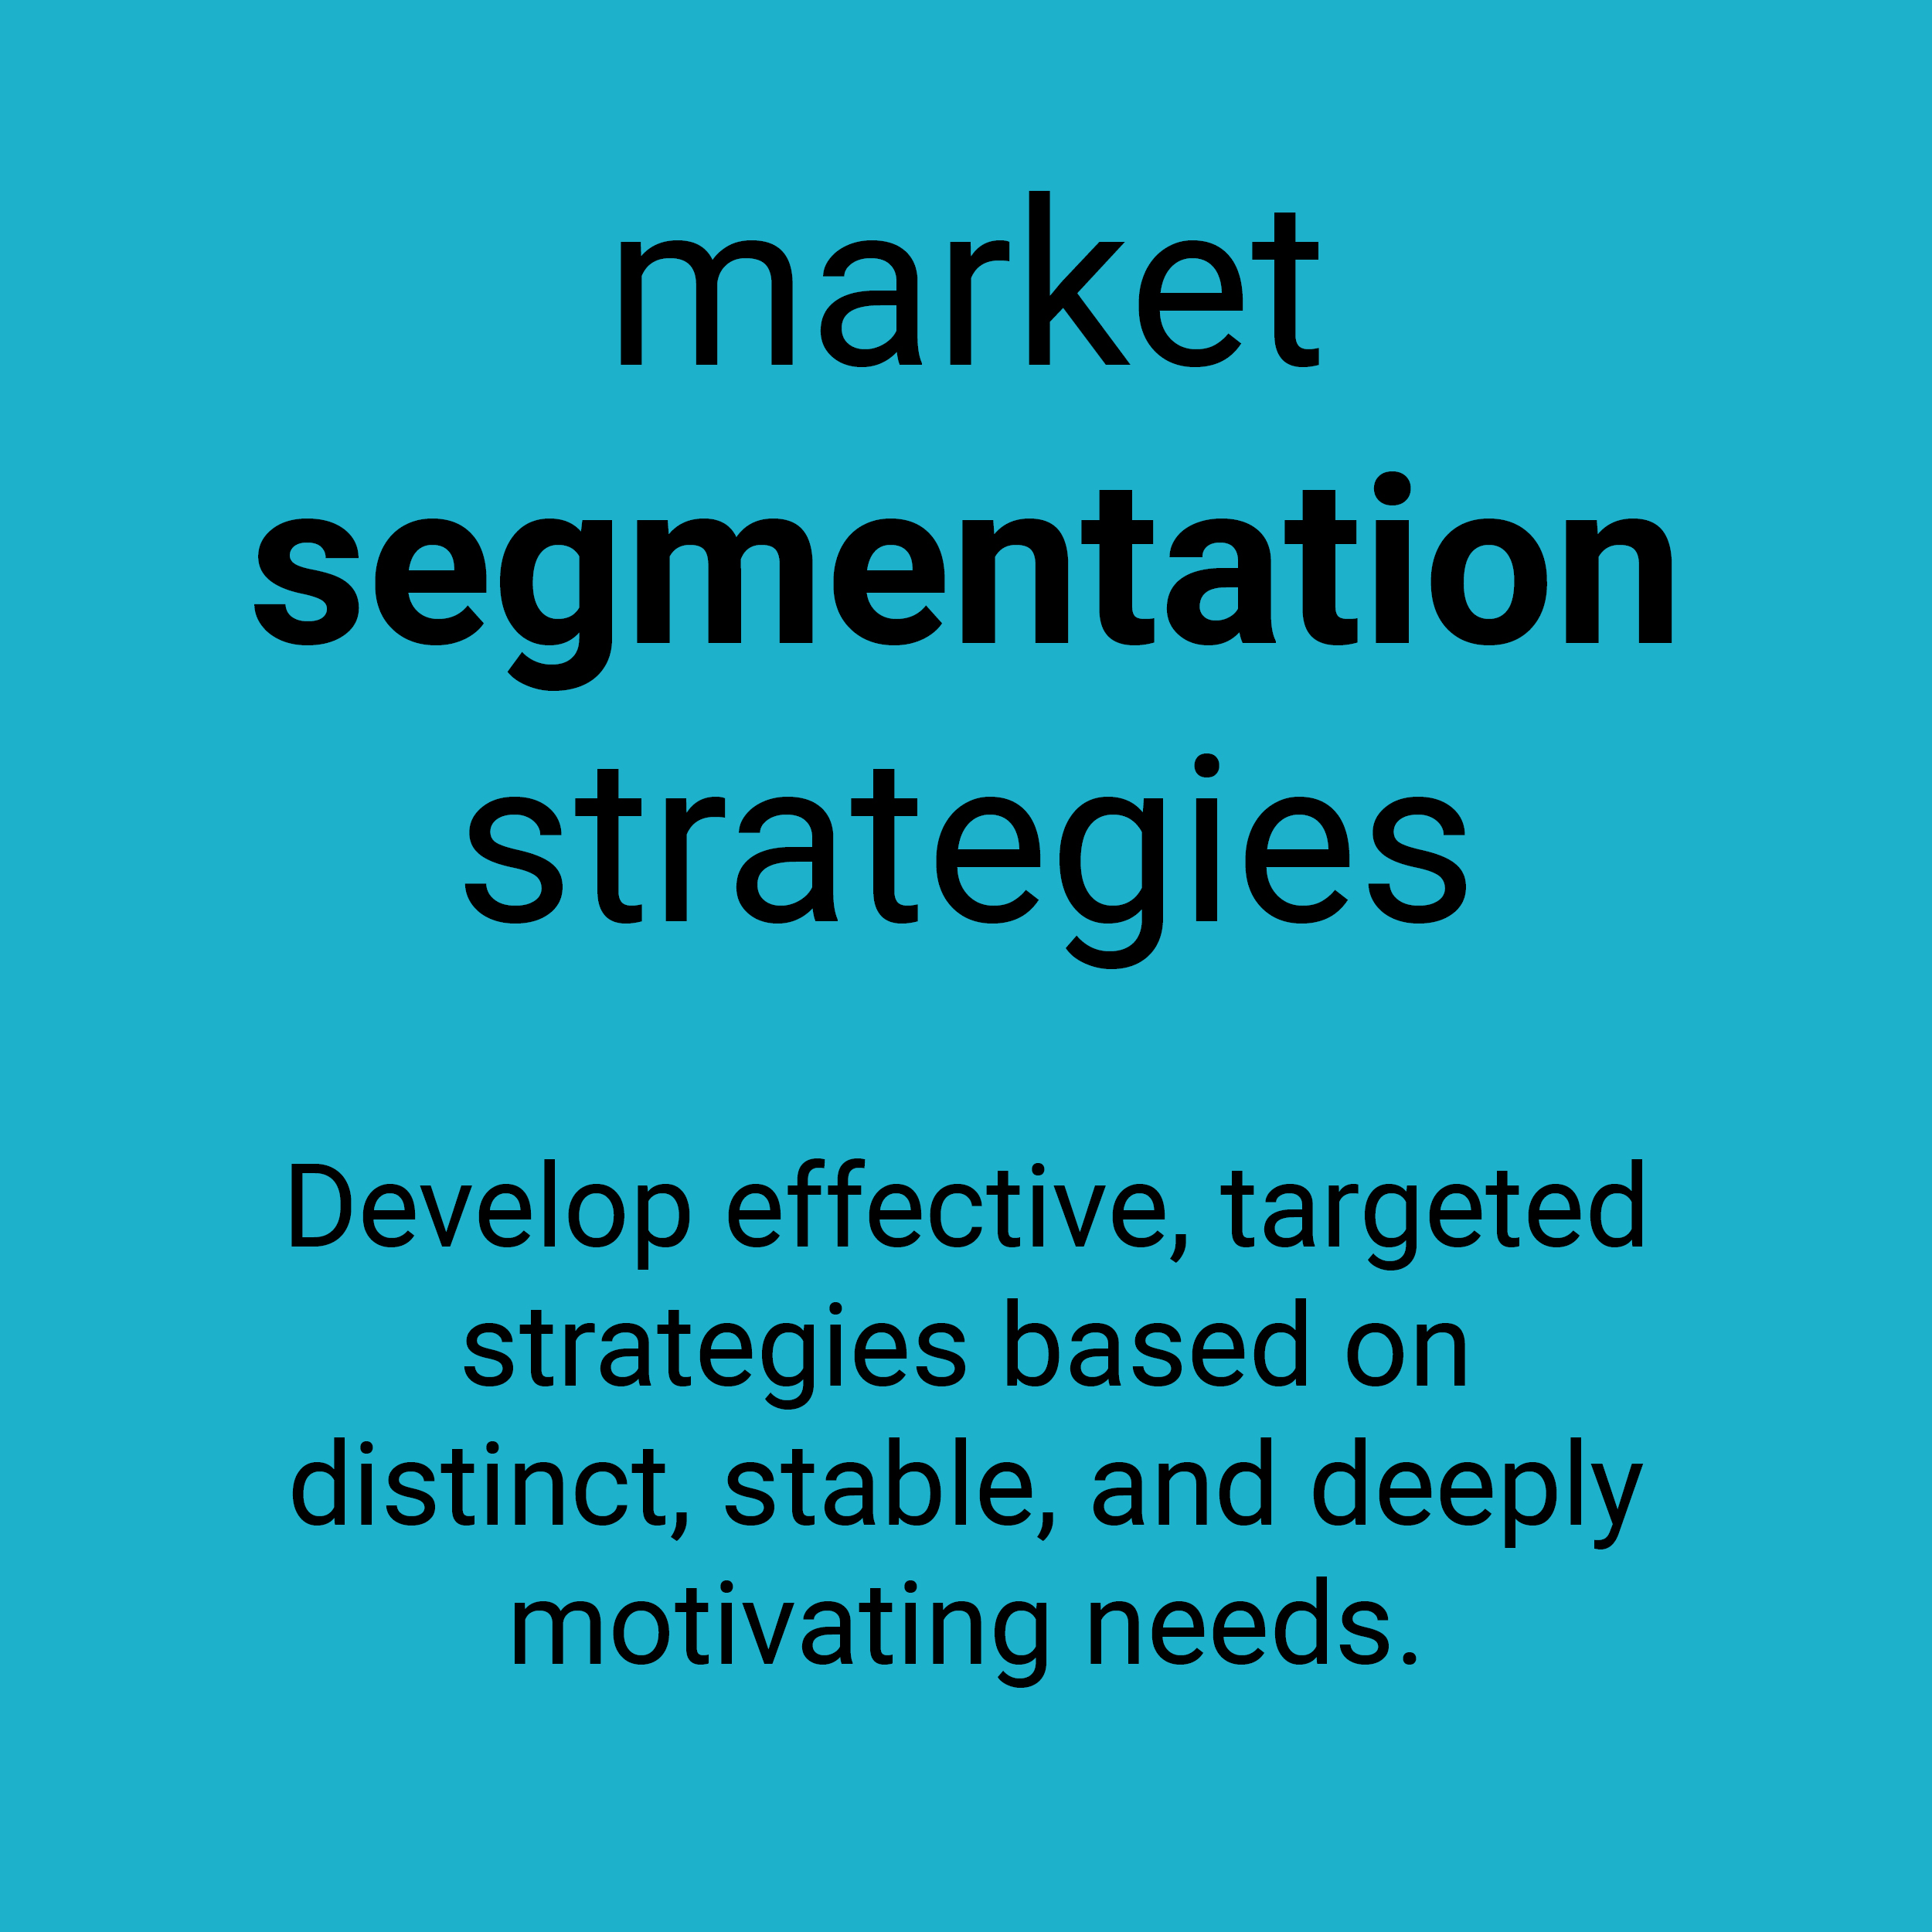 Market segmentation strategies. Develop effective, targeted strategies based on distinct, stable, and deeply motivating needs.